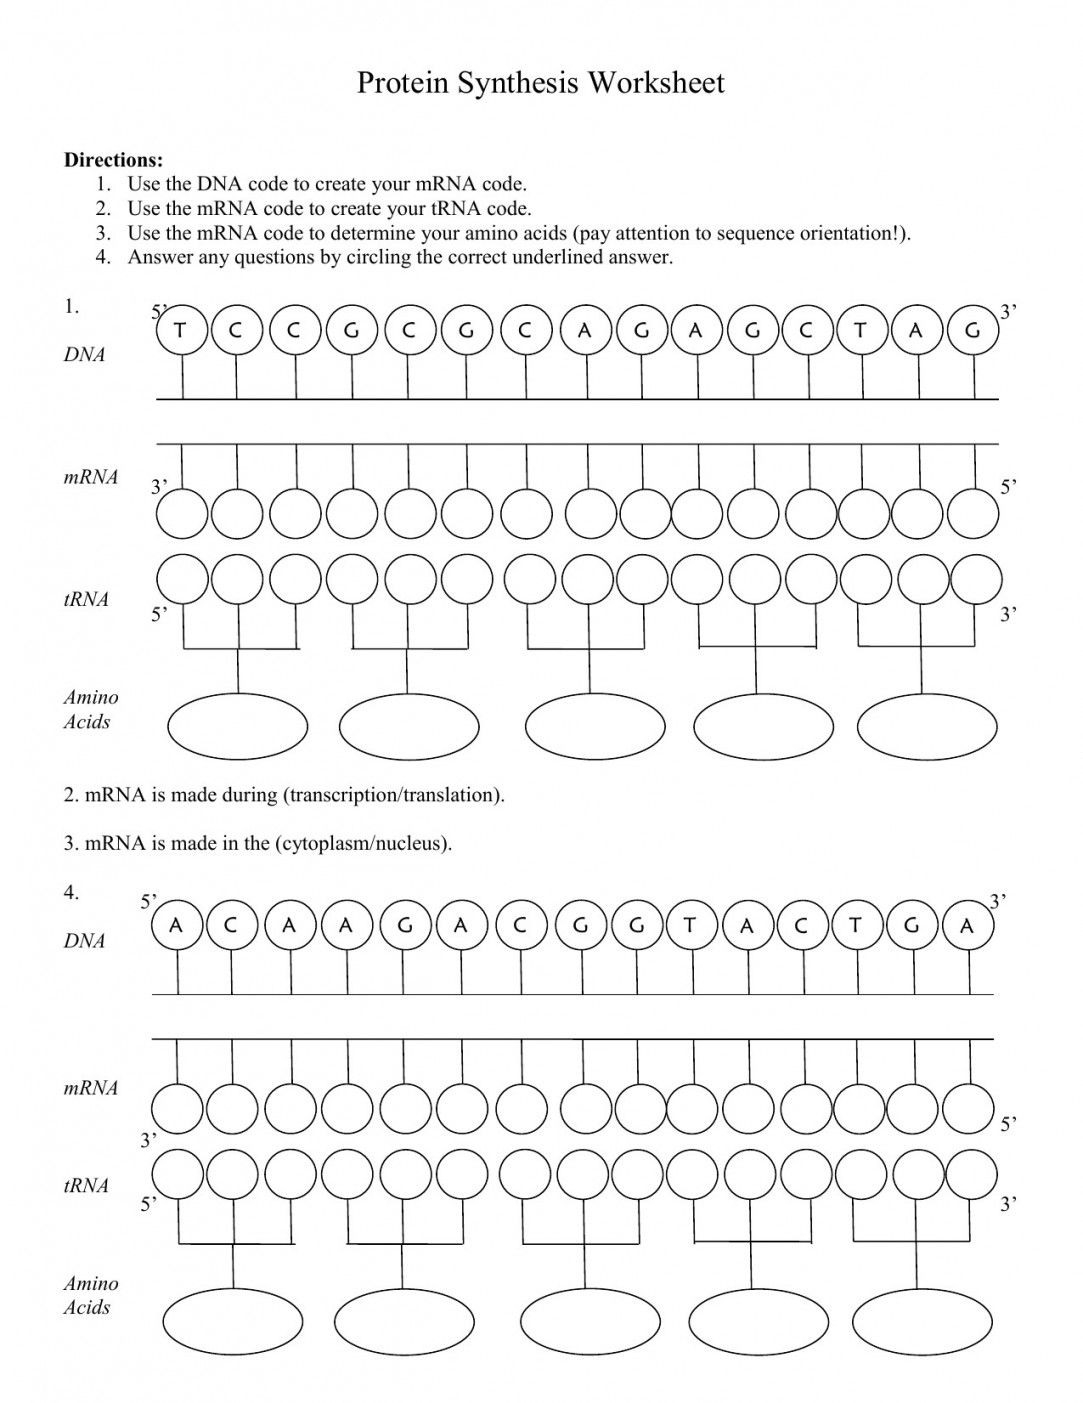 dna-and-protein-synthesis-worksheet-answers-protein-db-excel